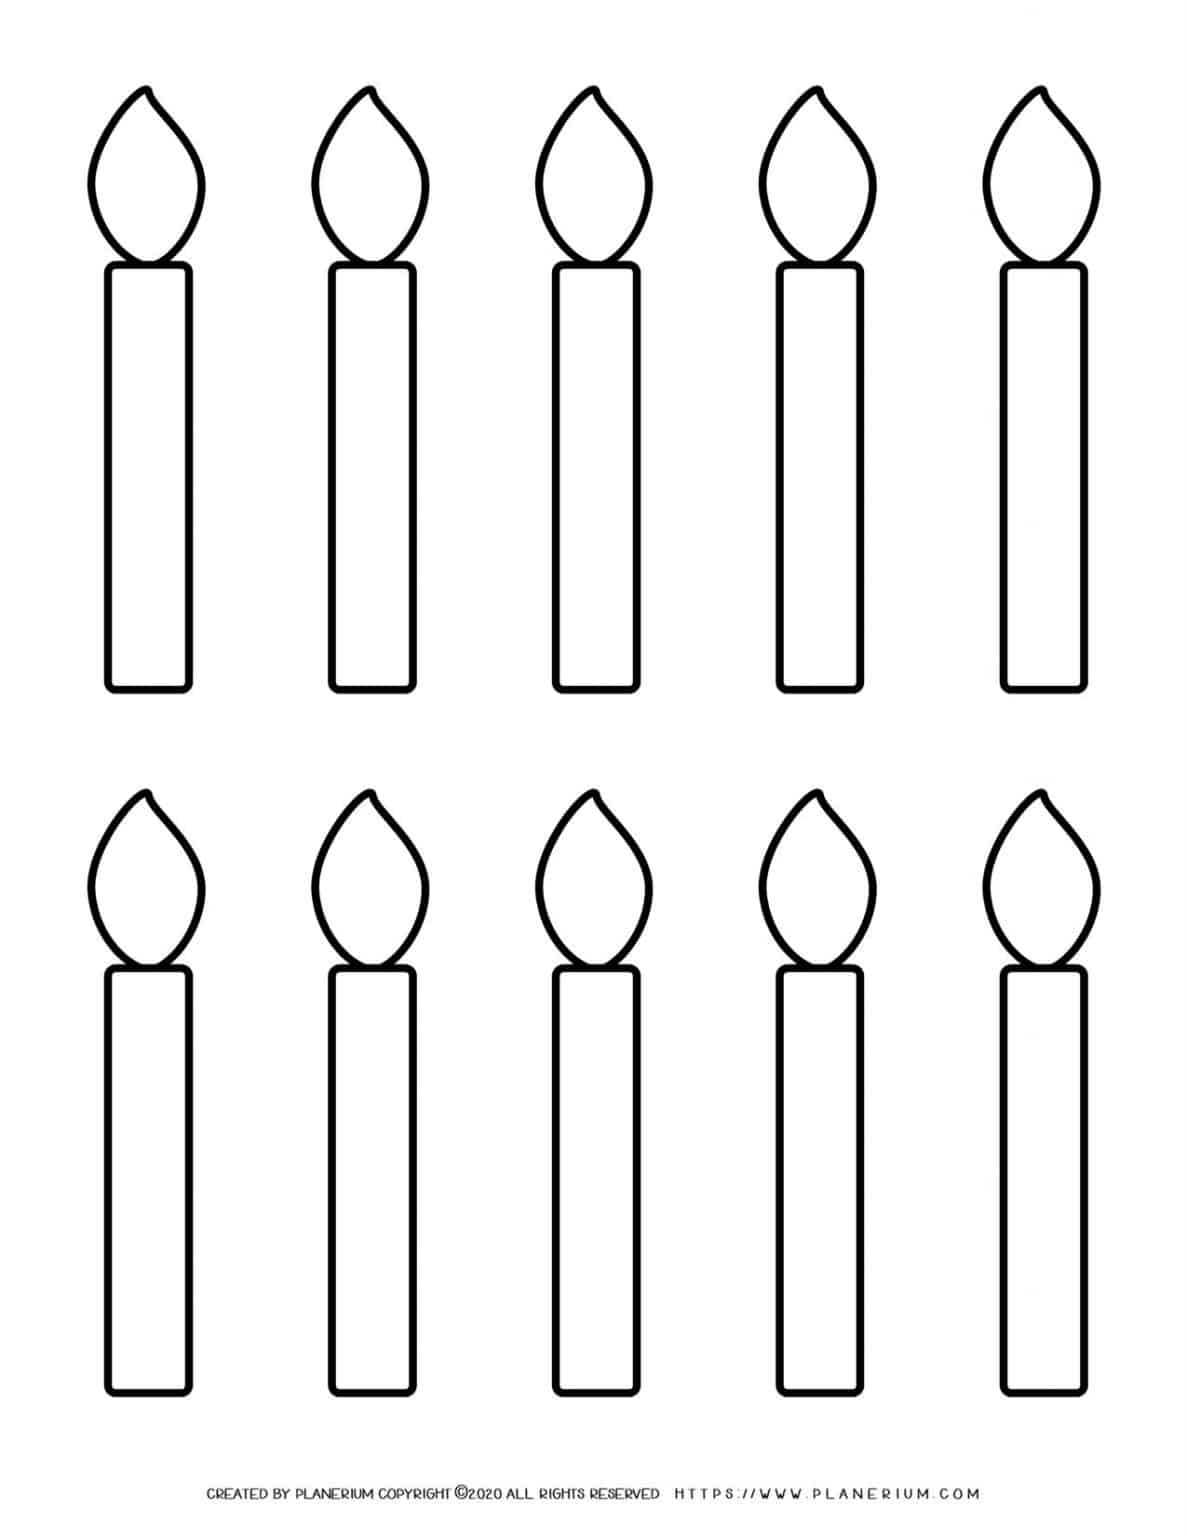 candles-outline-ten-small-candles-planerium